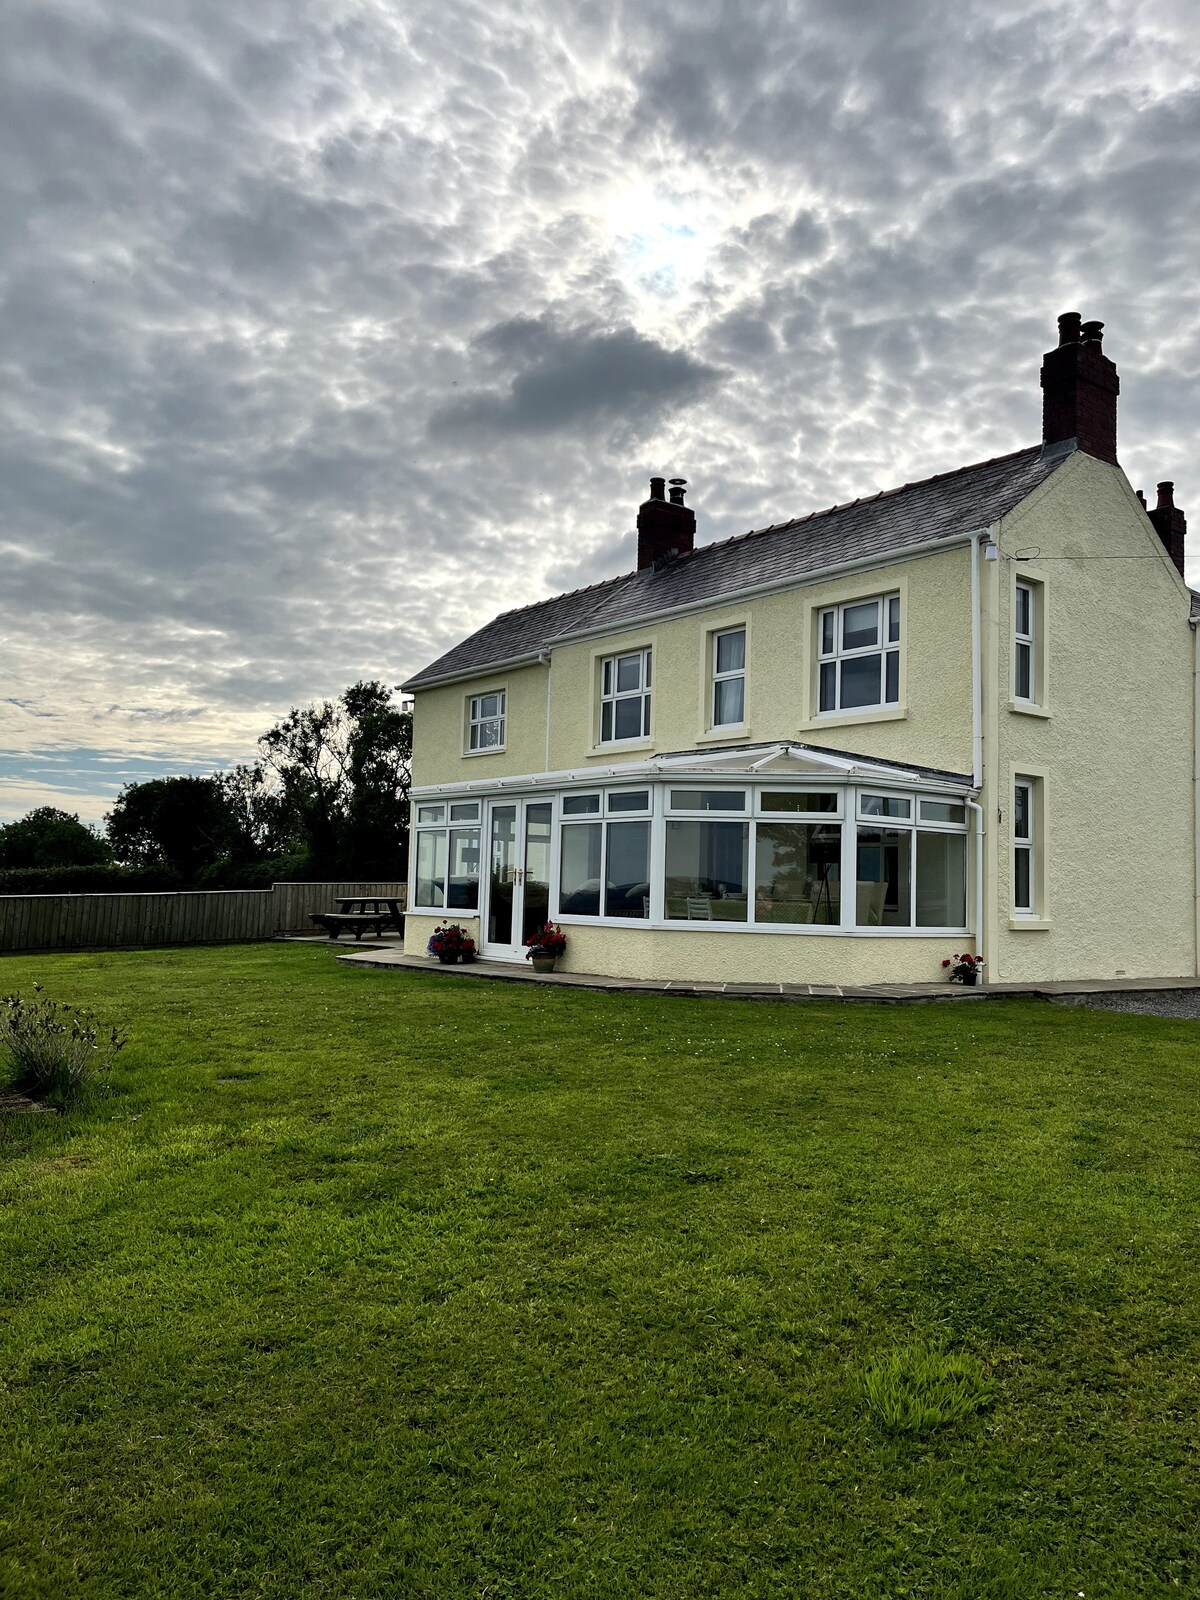 Detached house with panoramic views.Sleeps 11-13